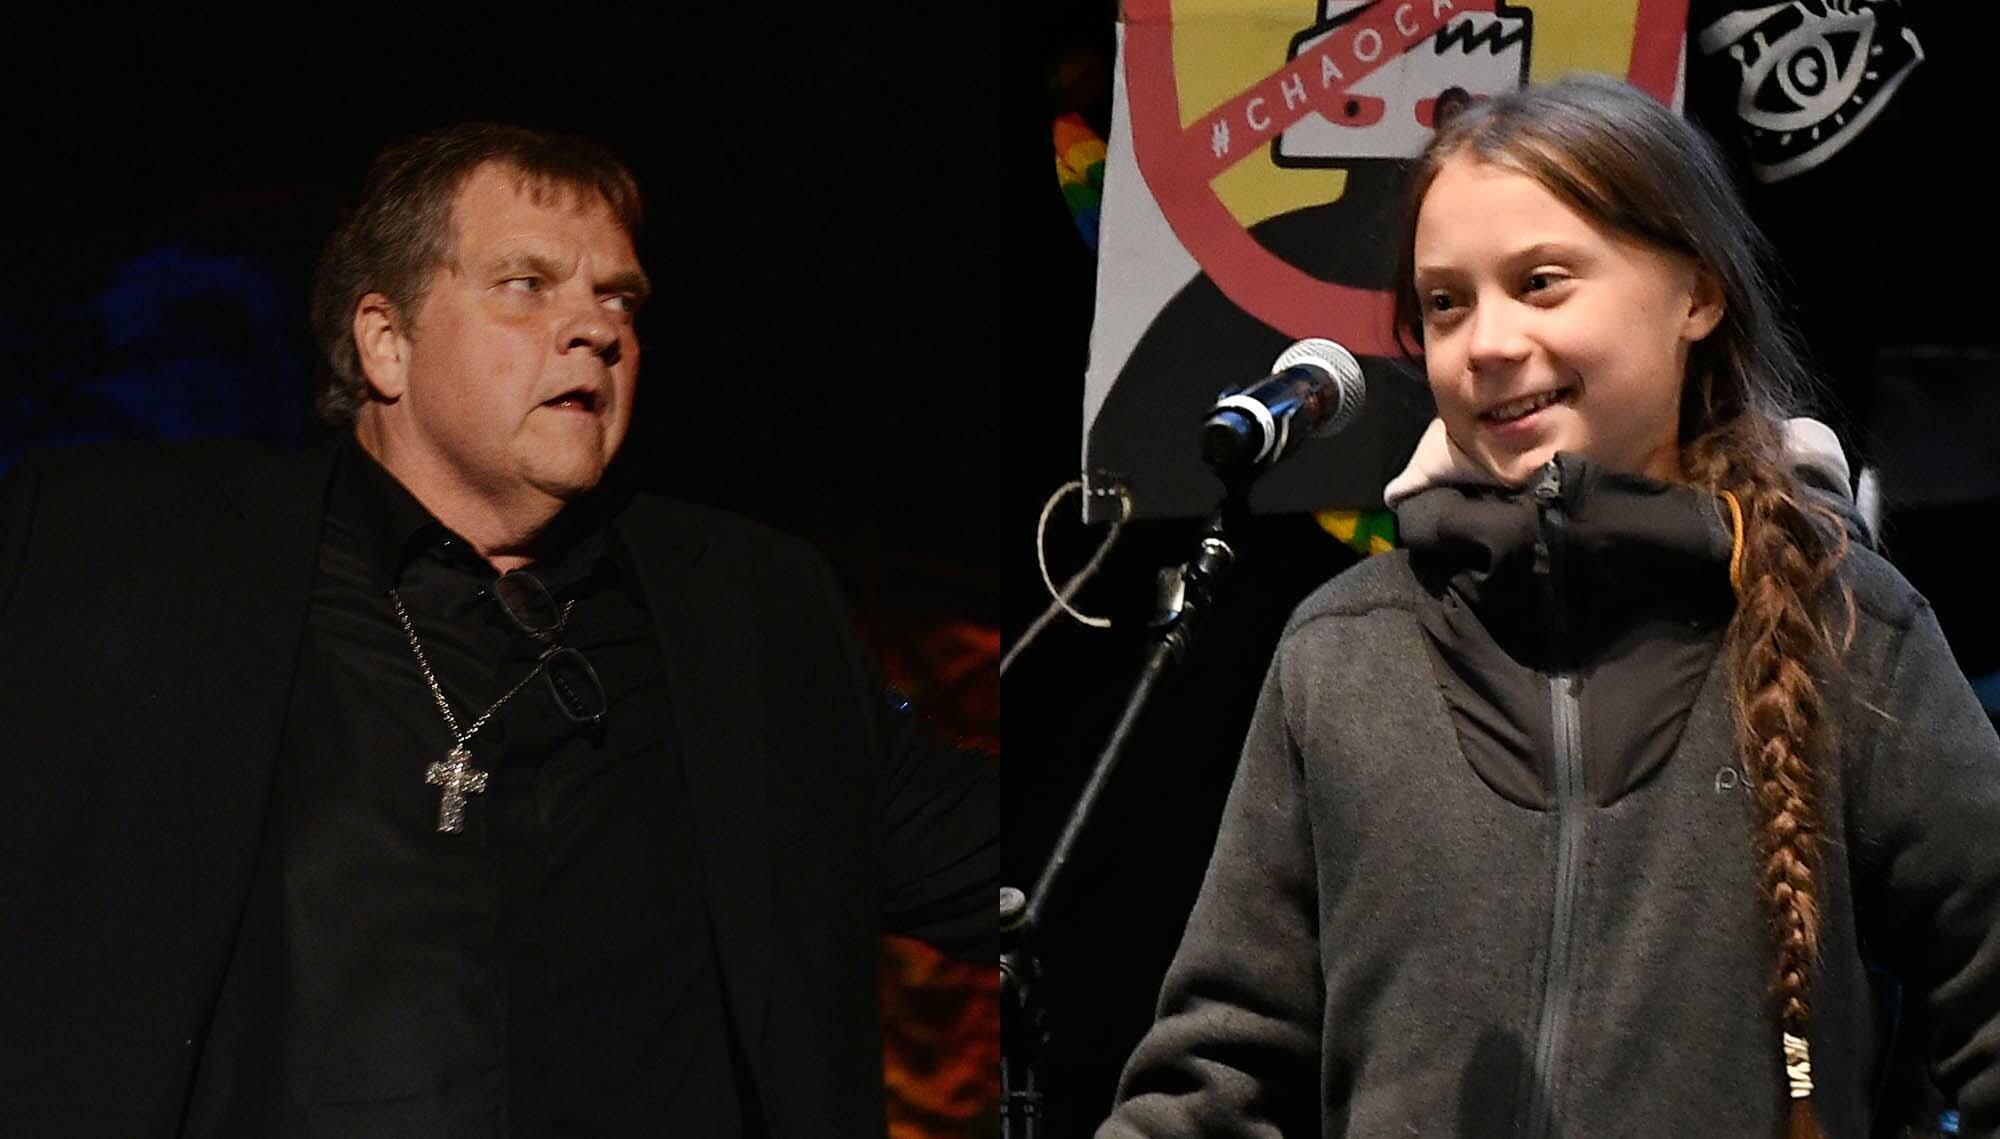 Meat Loaf Says Climate Change Is A Hoax, Greta Thunberg Is "Brainwashed" - iHeartRadio